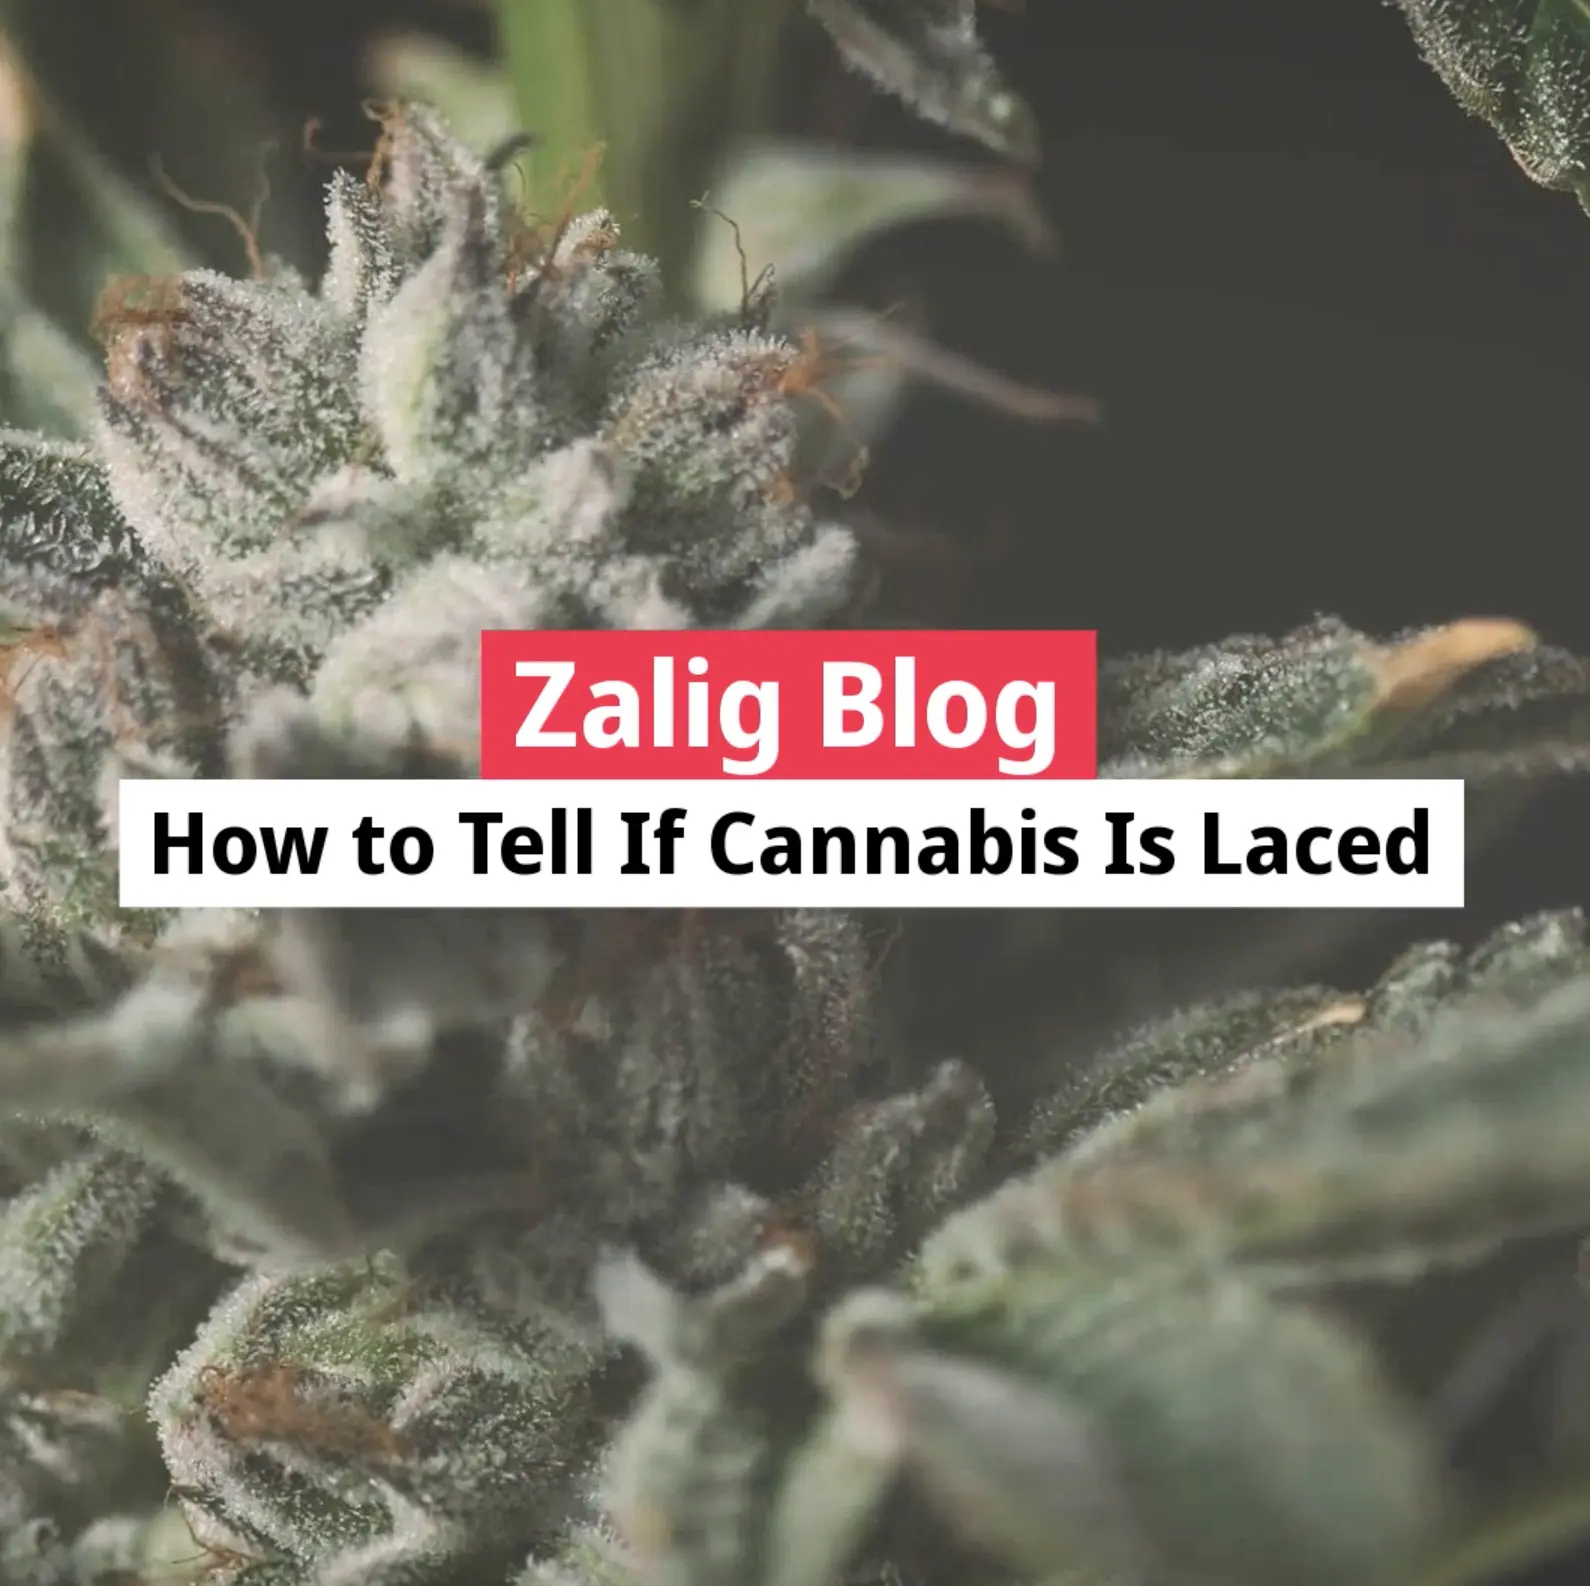 how to know if you smoked laced weed - How do you test weed to see if it's laced